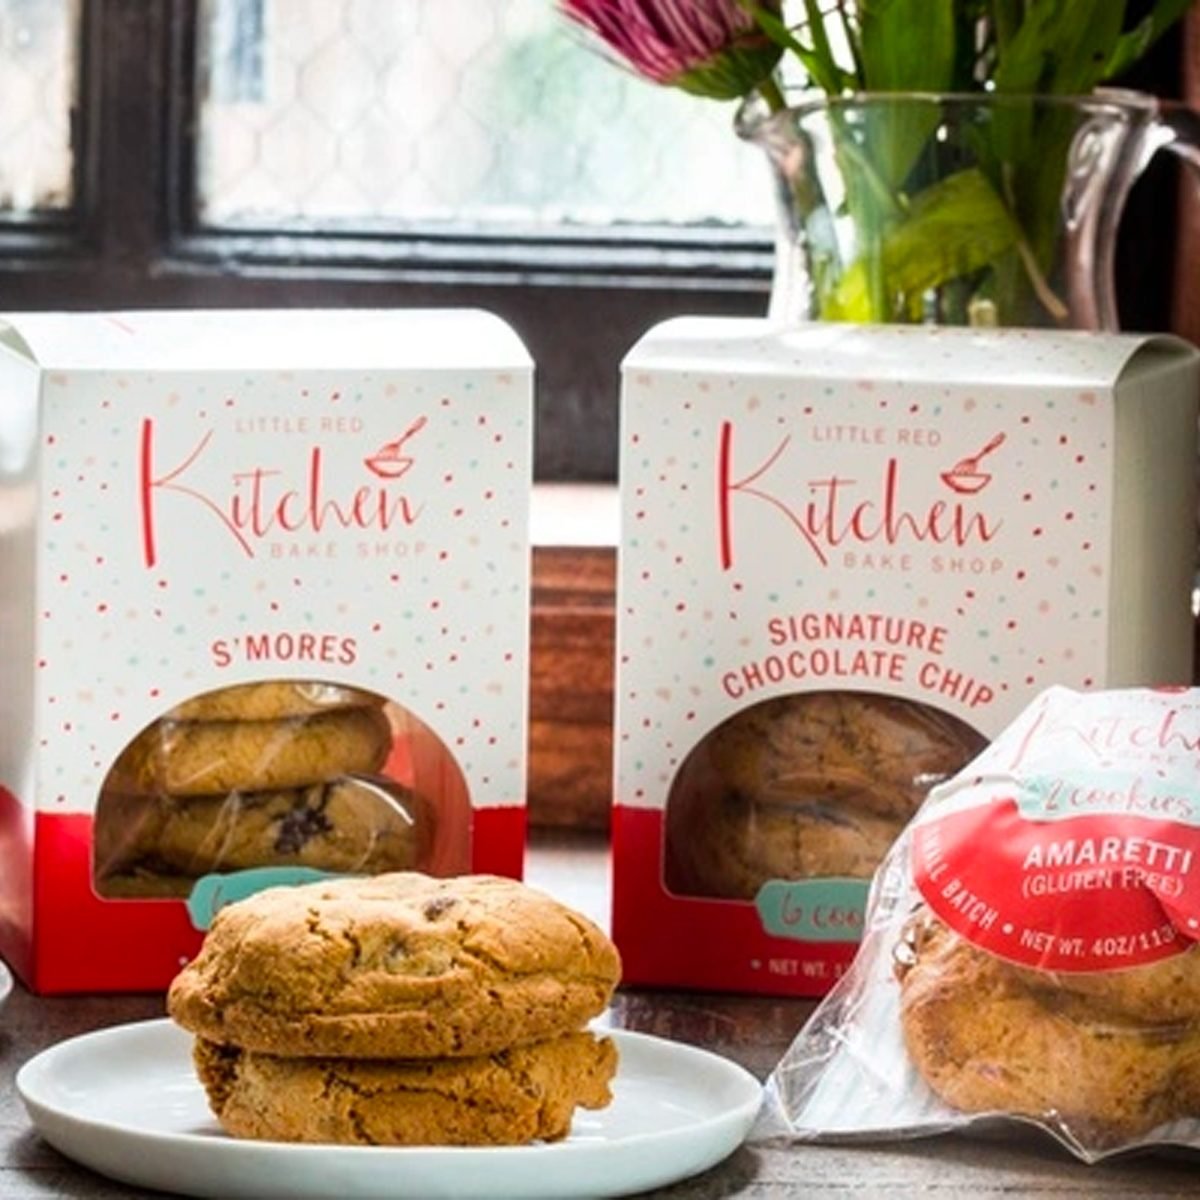 Cookie Of The Month By Little Red Kitchen Bake Shop